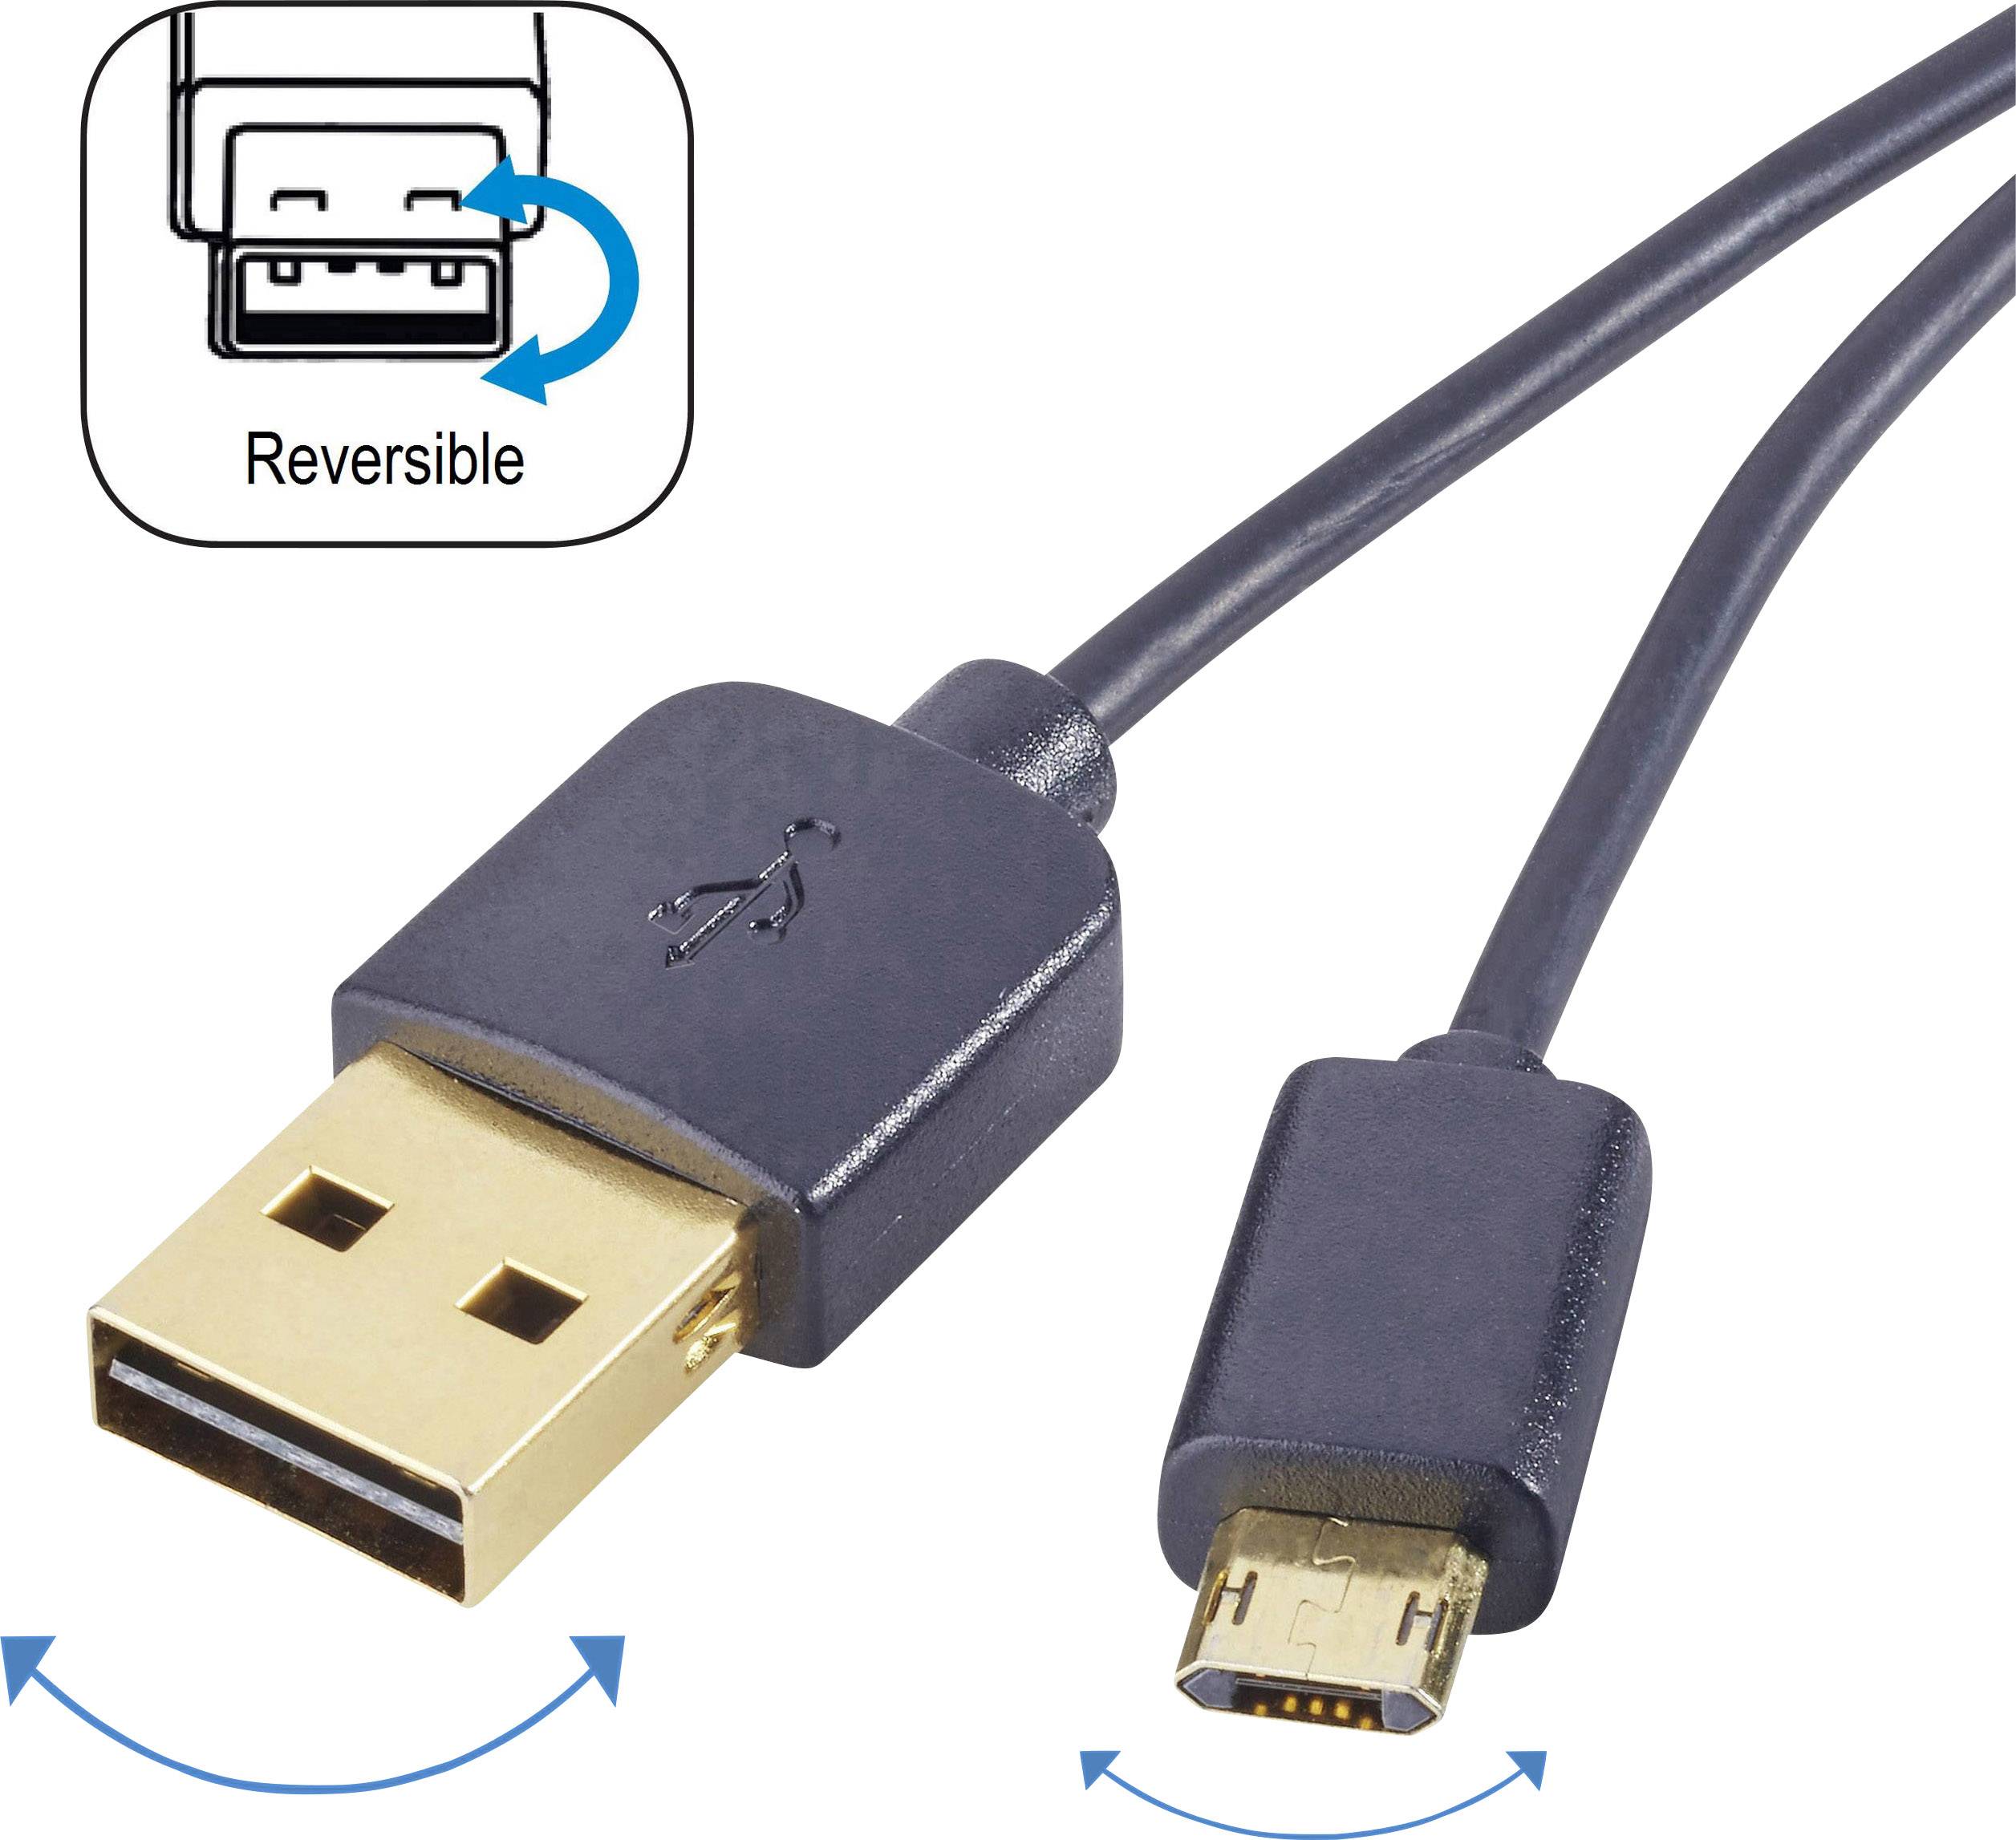 Buy Renkforce USB-to-Midi cable